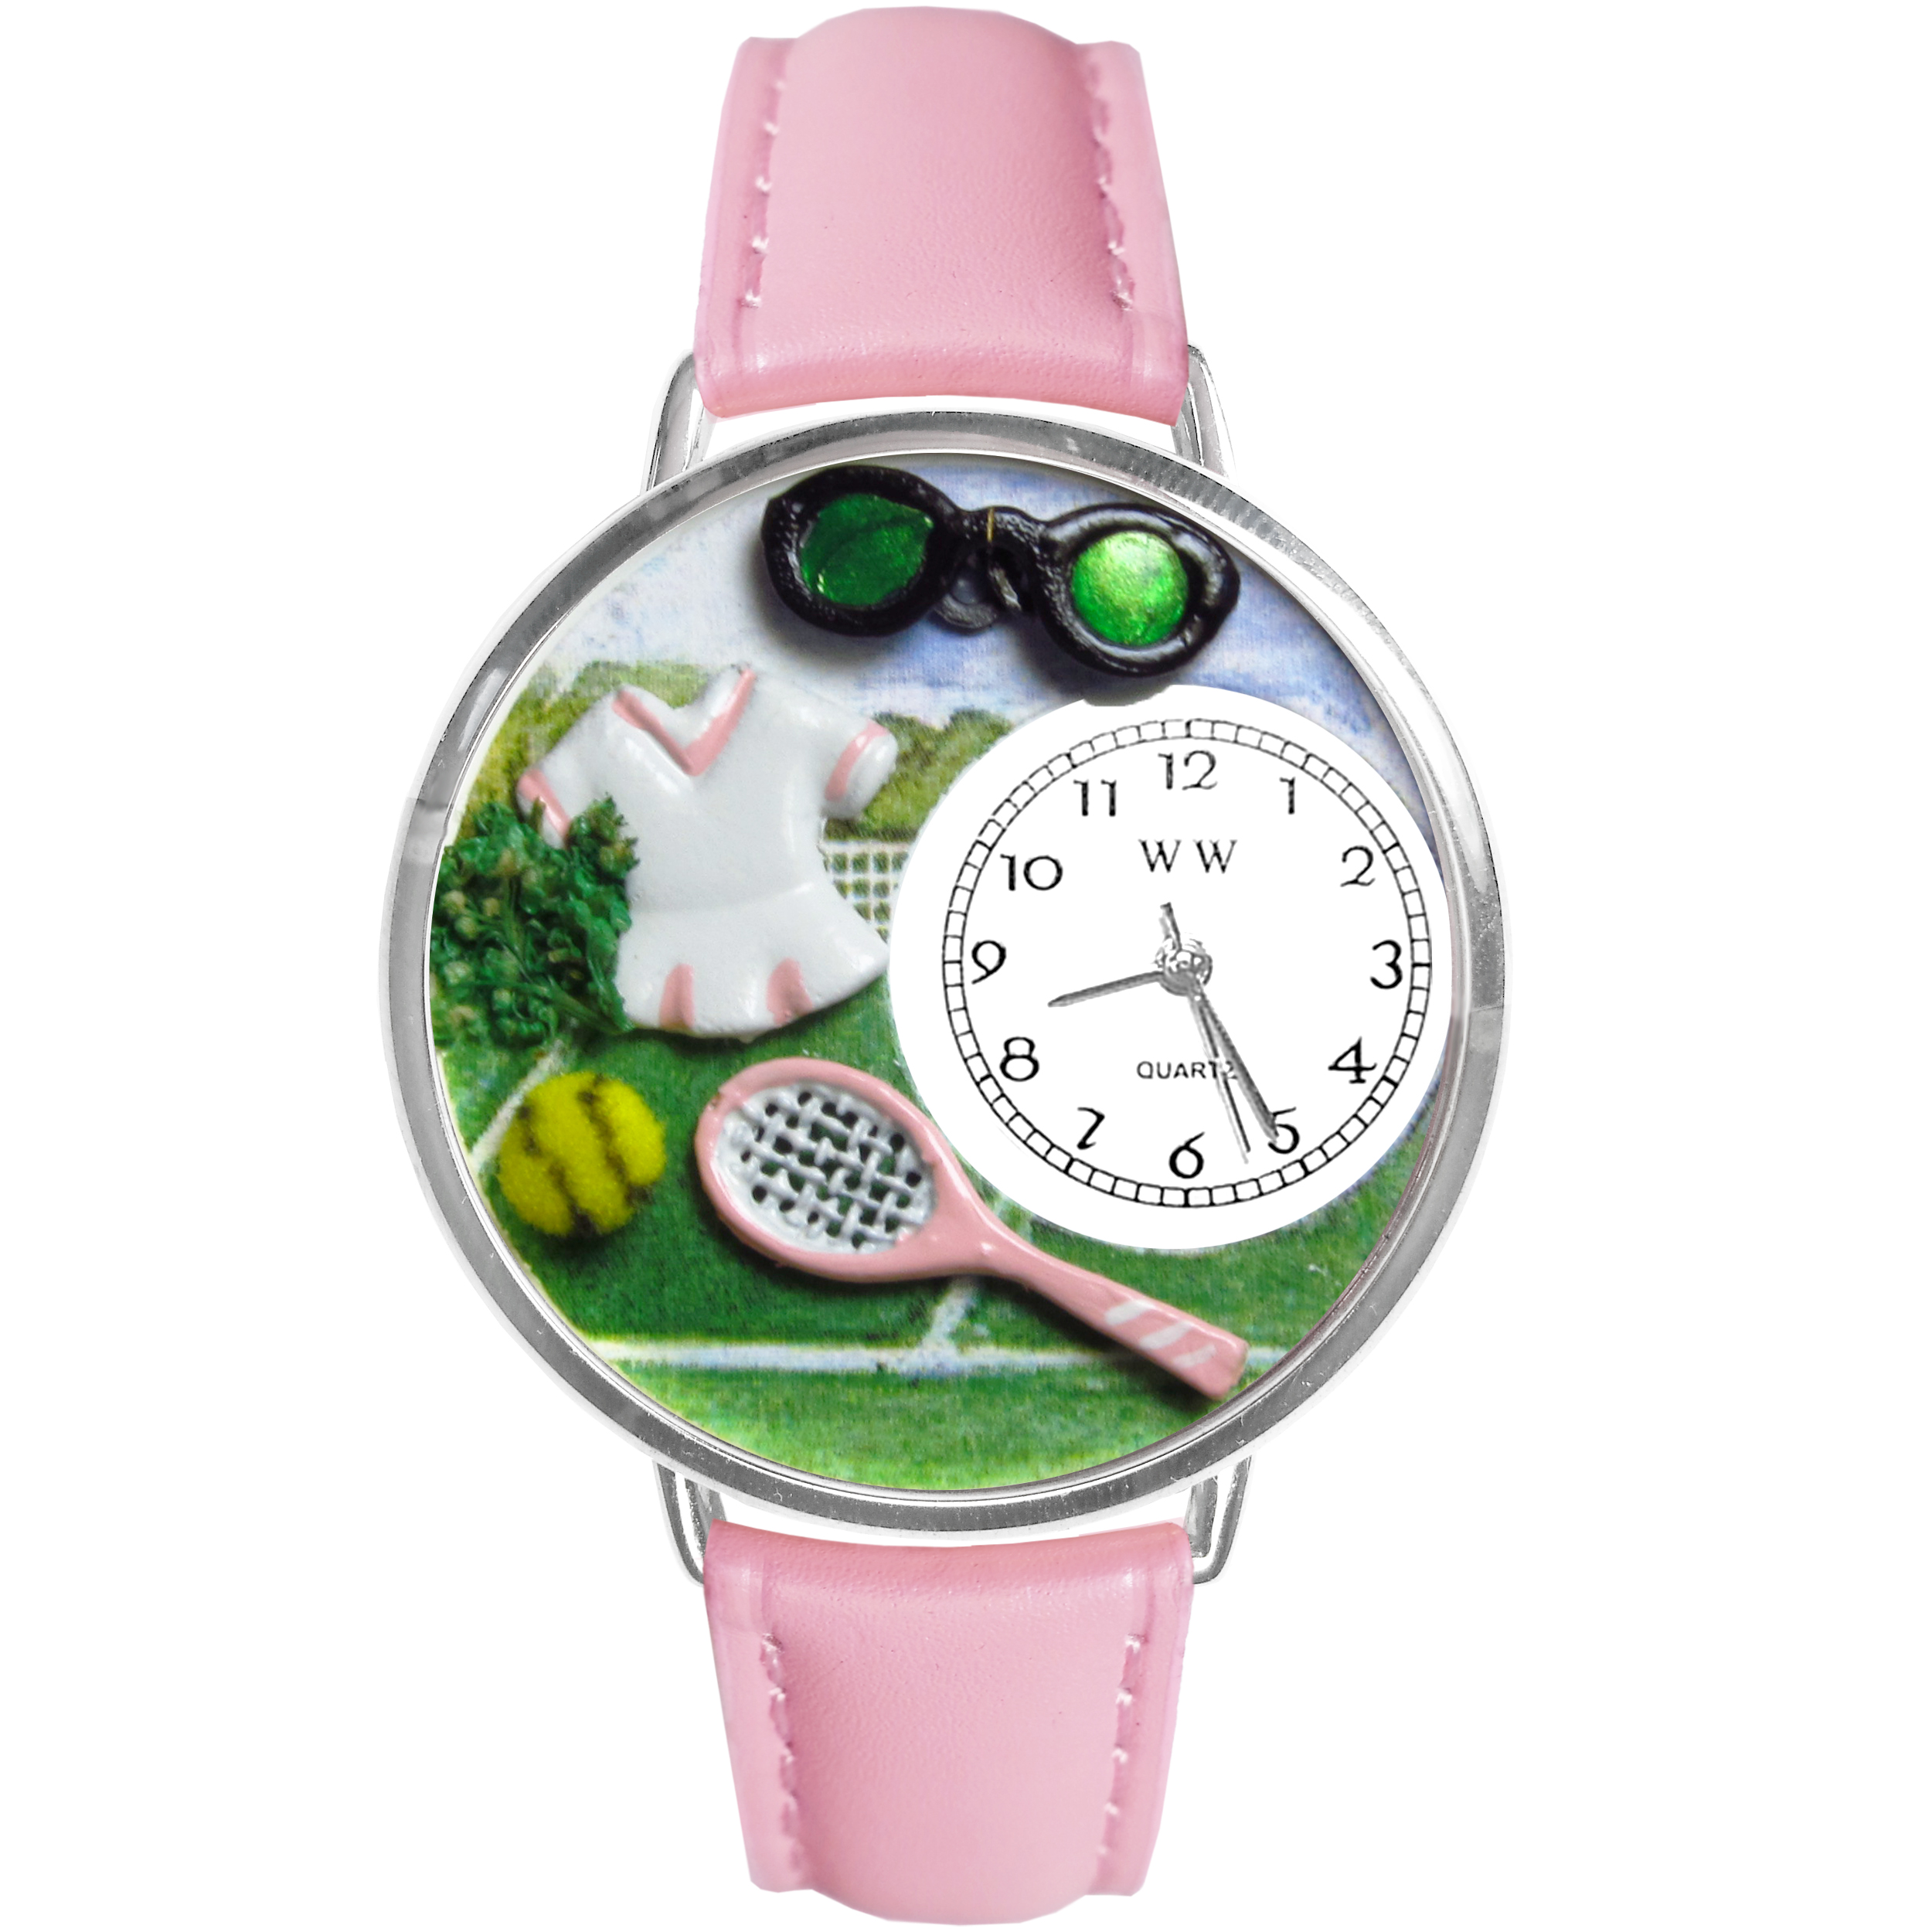 Tennis Watch (Female) in Silver (Large)